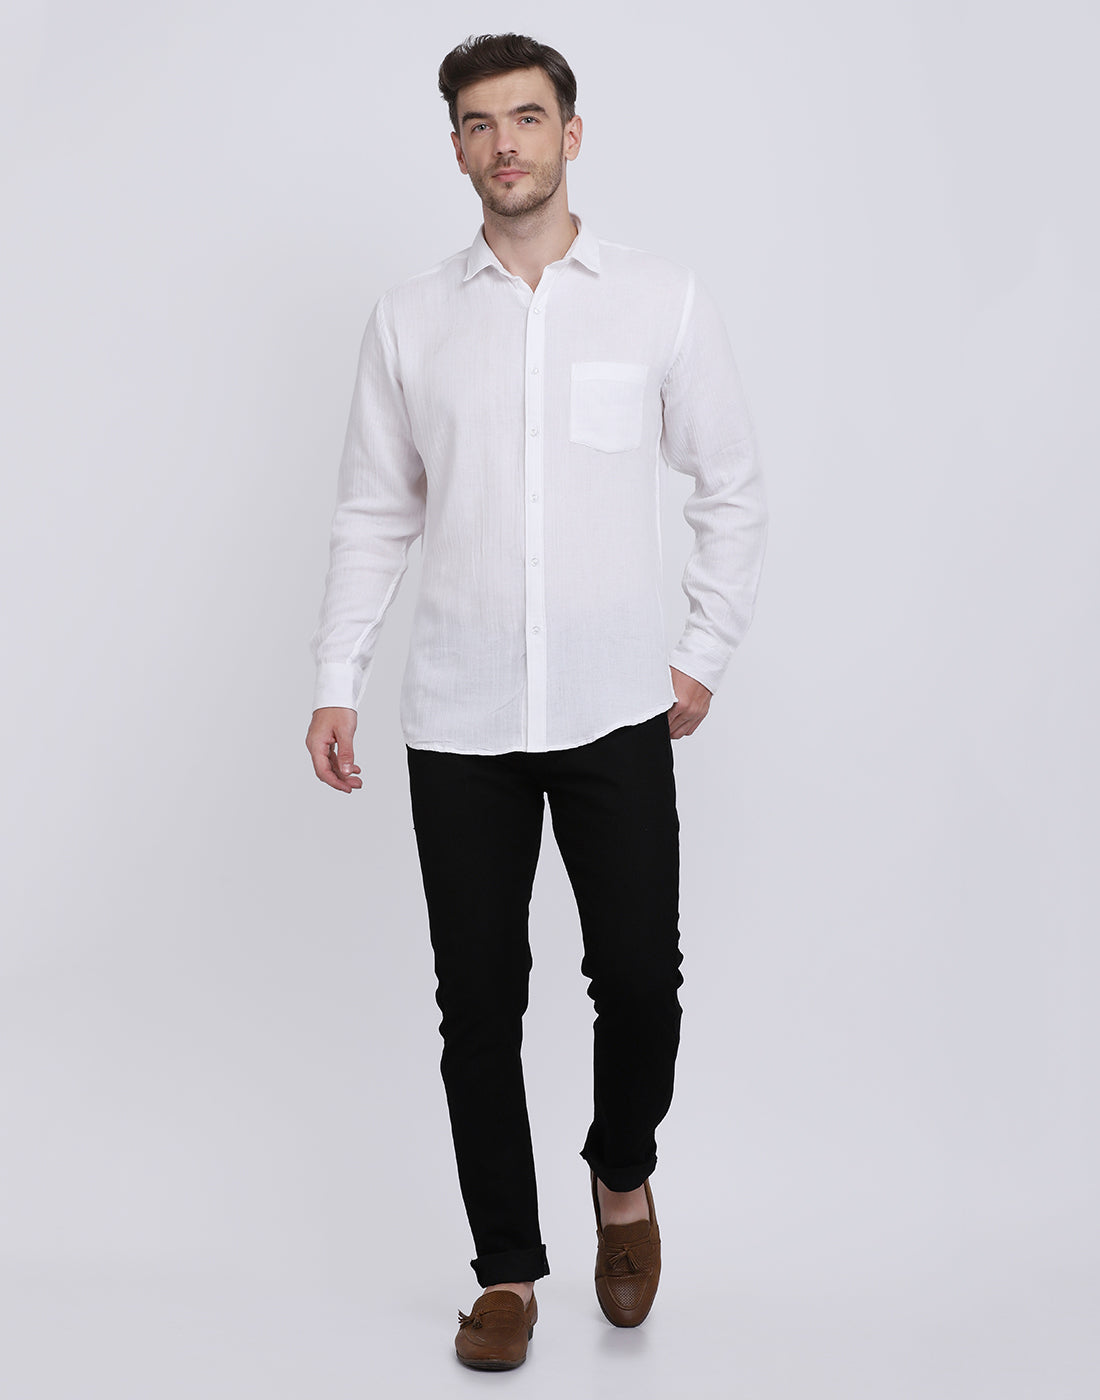 Double Cloth Crinkled Cotton men's Long Sleeves shirt